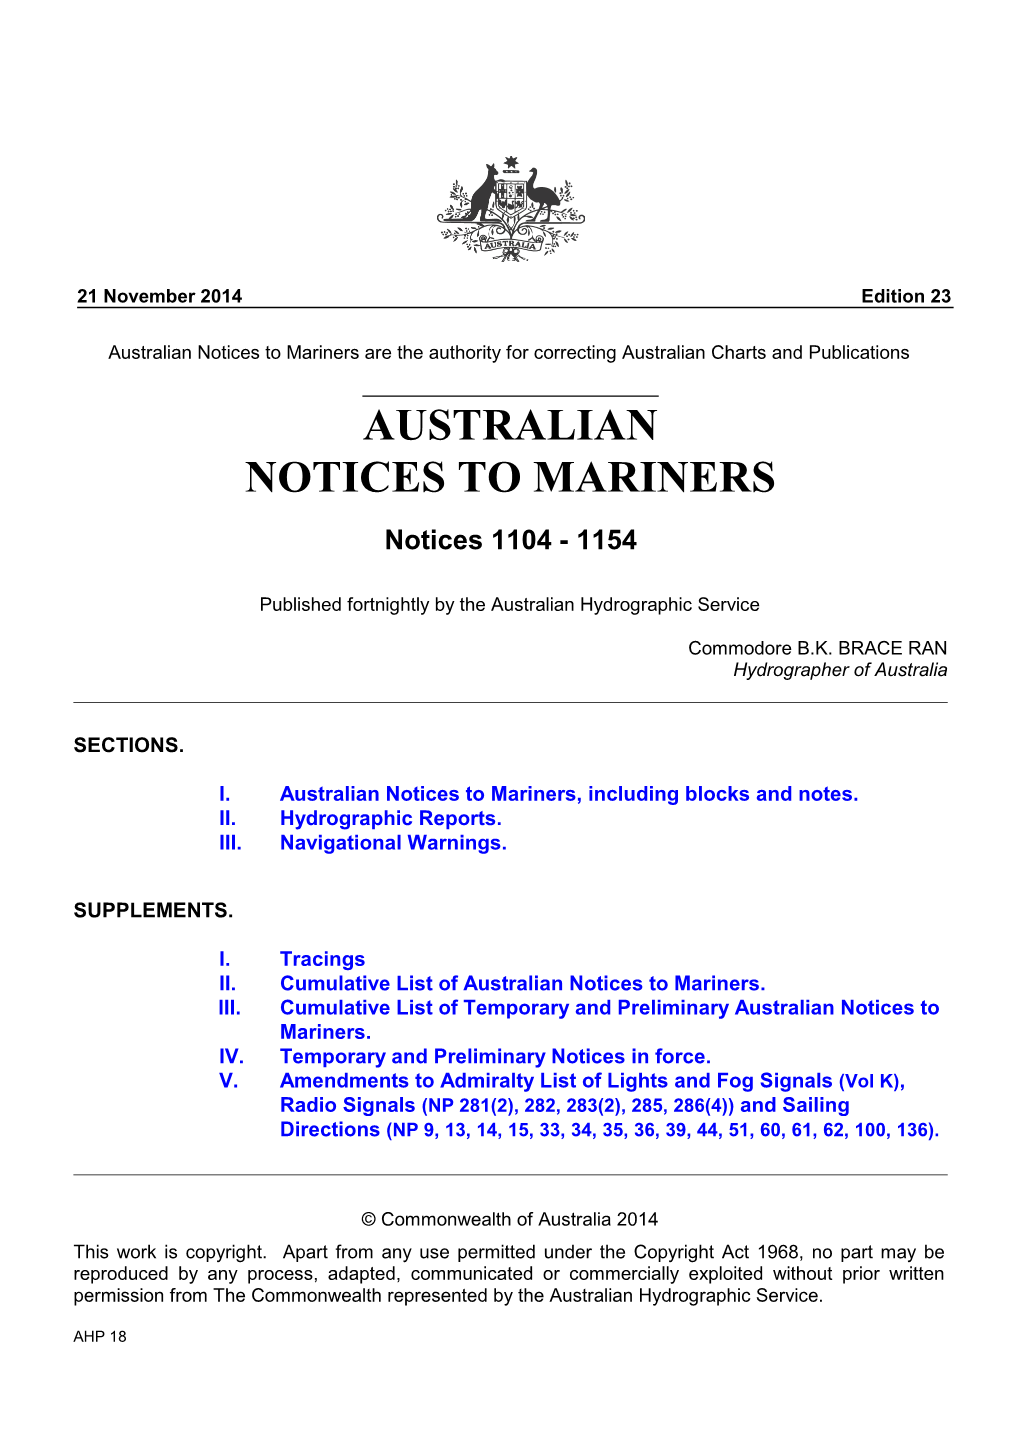 Australian Notices to Mariners Are the Authority for Correcting Australian Charts and Publications AUSTRALIAN NOTICES to MARINERS Notices 1104 - 1154